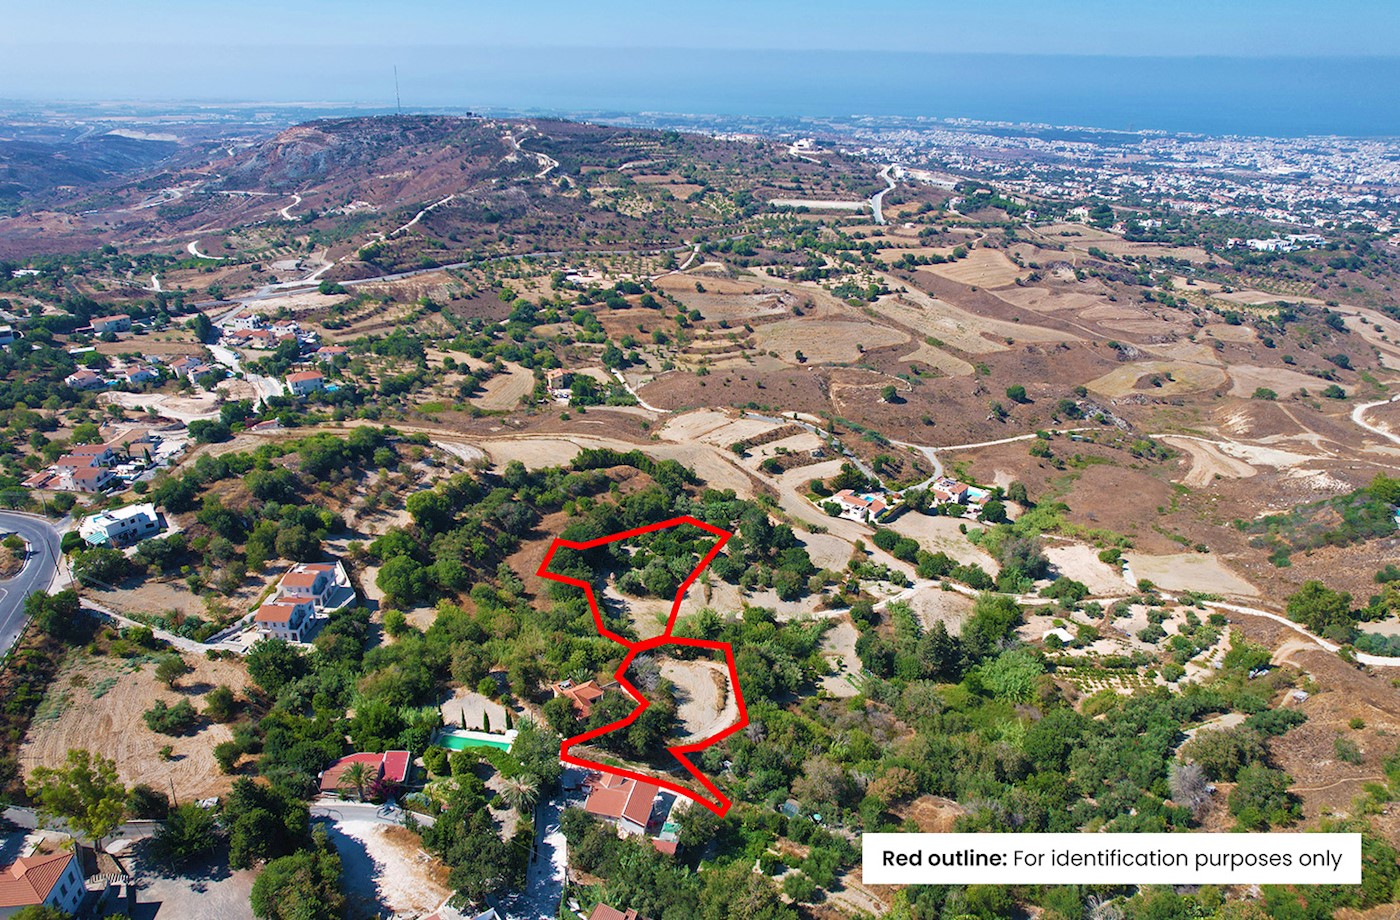 2 x Residential fields in Armou, Paphos 1/2